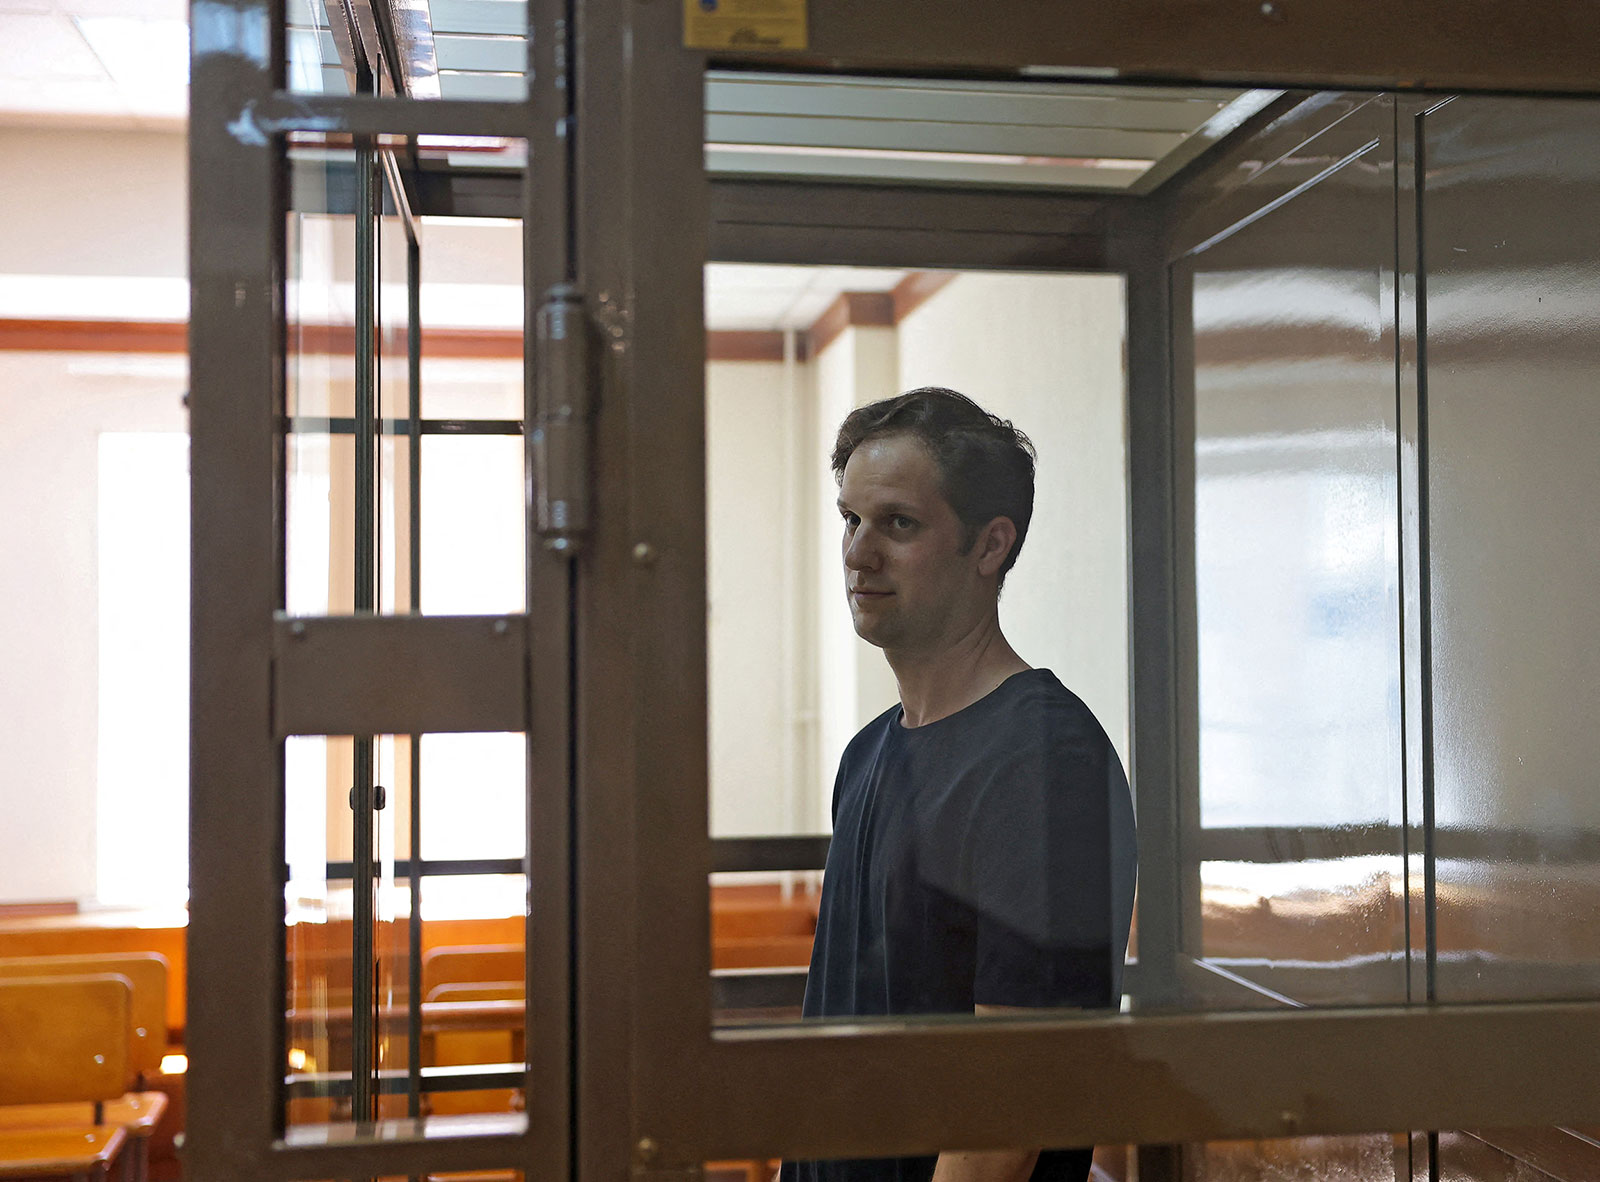 Gershkovich stands behind a glass wall of an enclosure for defendants before a court hearing to consider an appeal against his detention, in Moscow, Russia, on June 22.